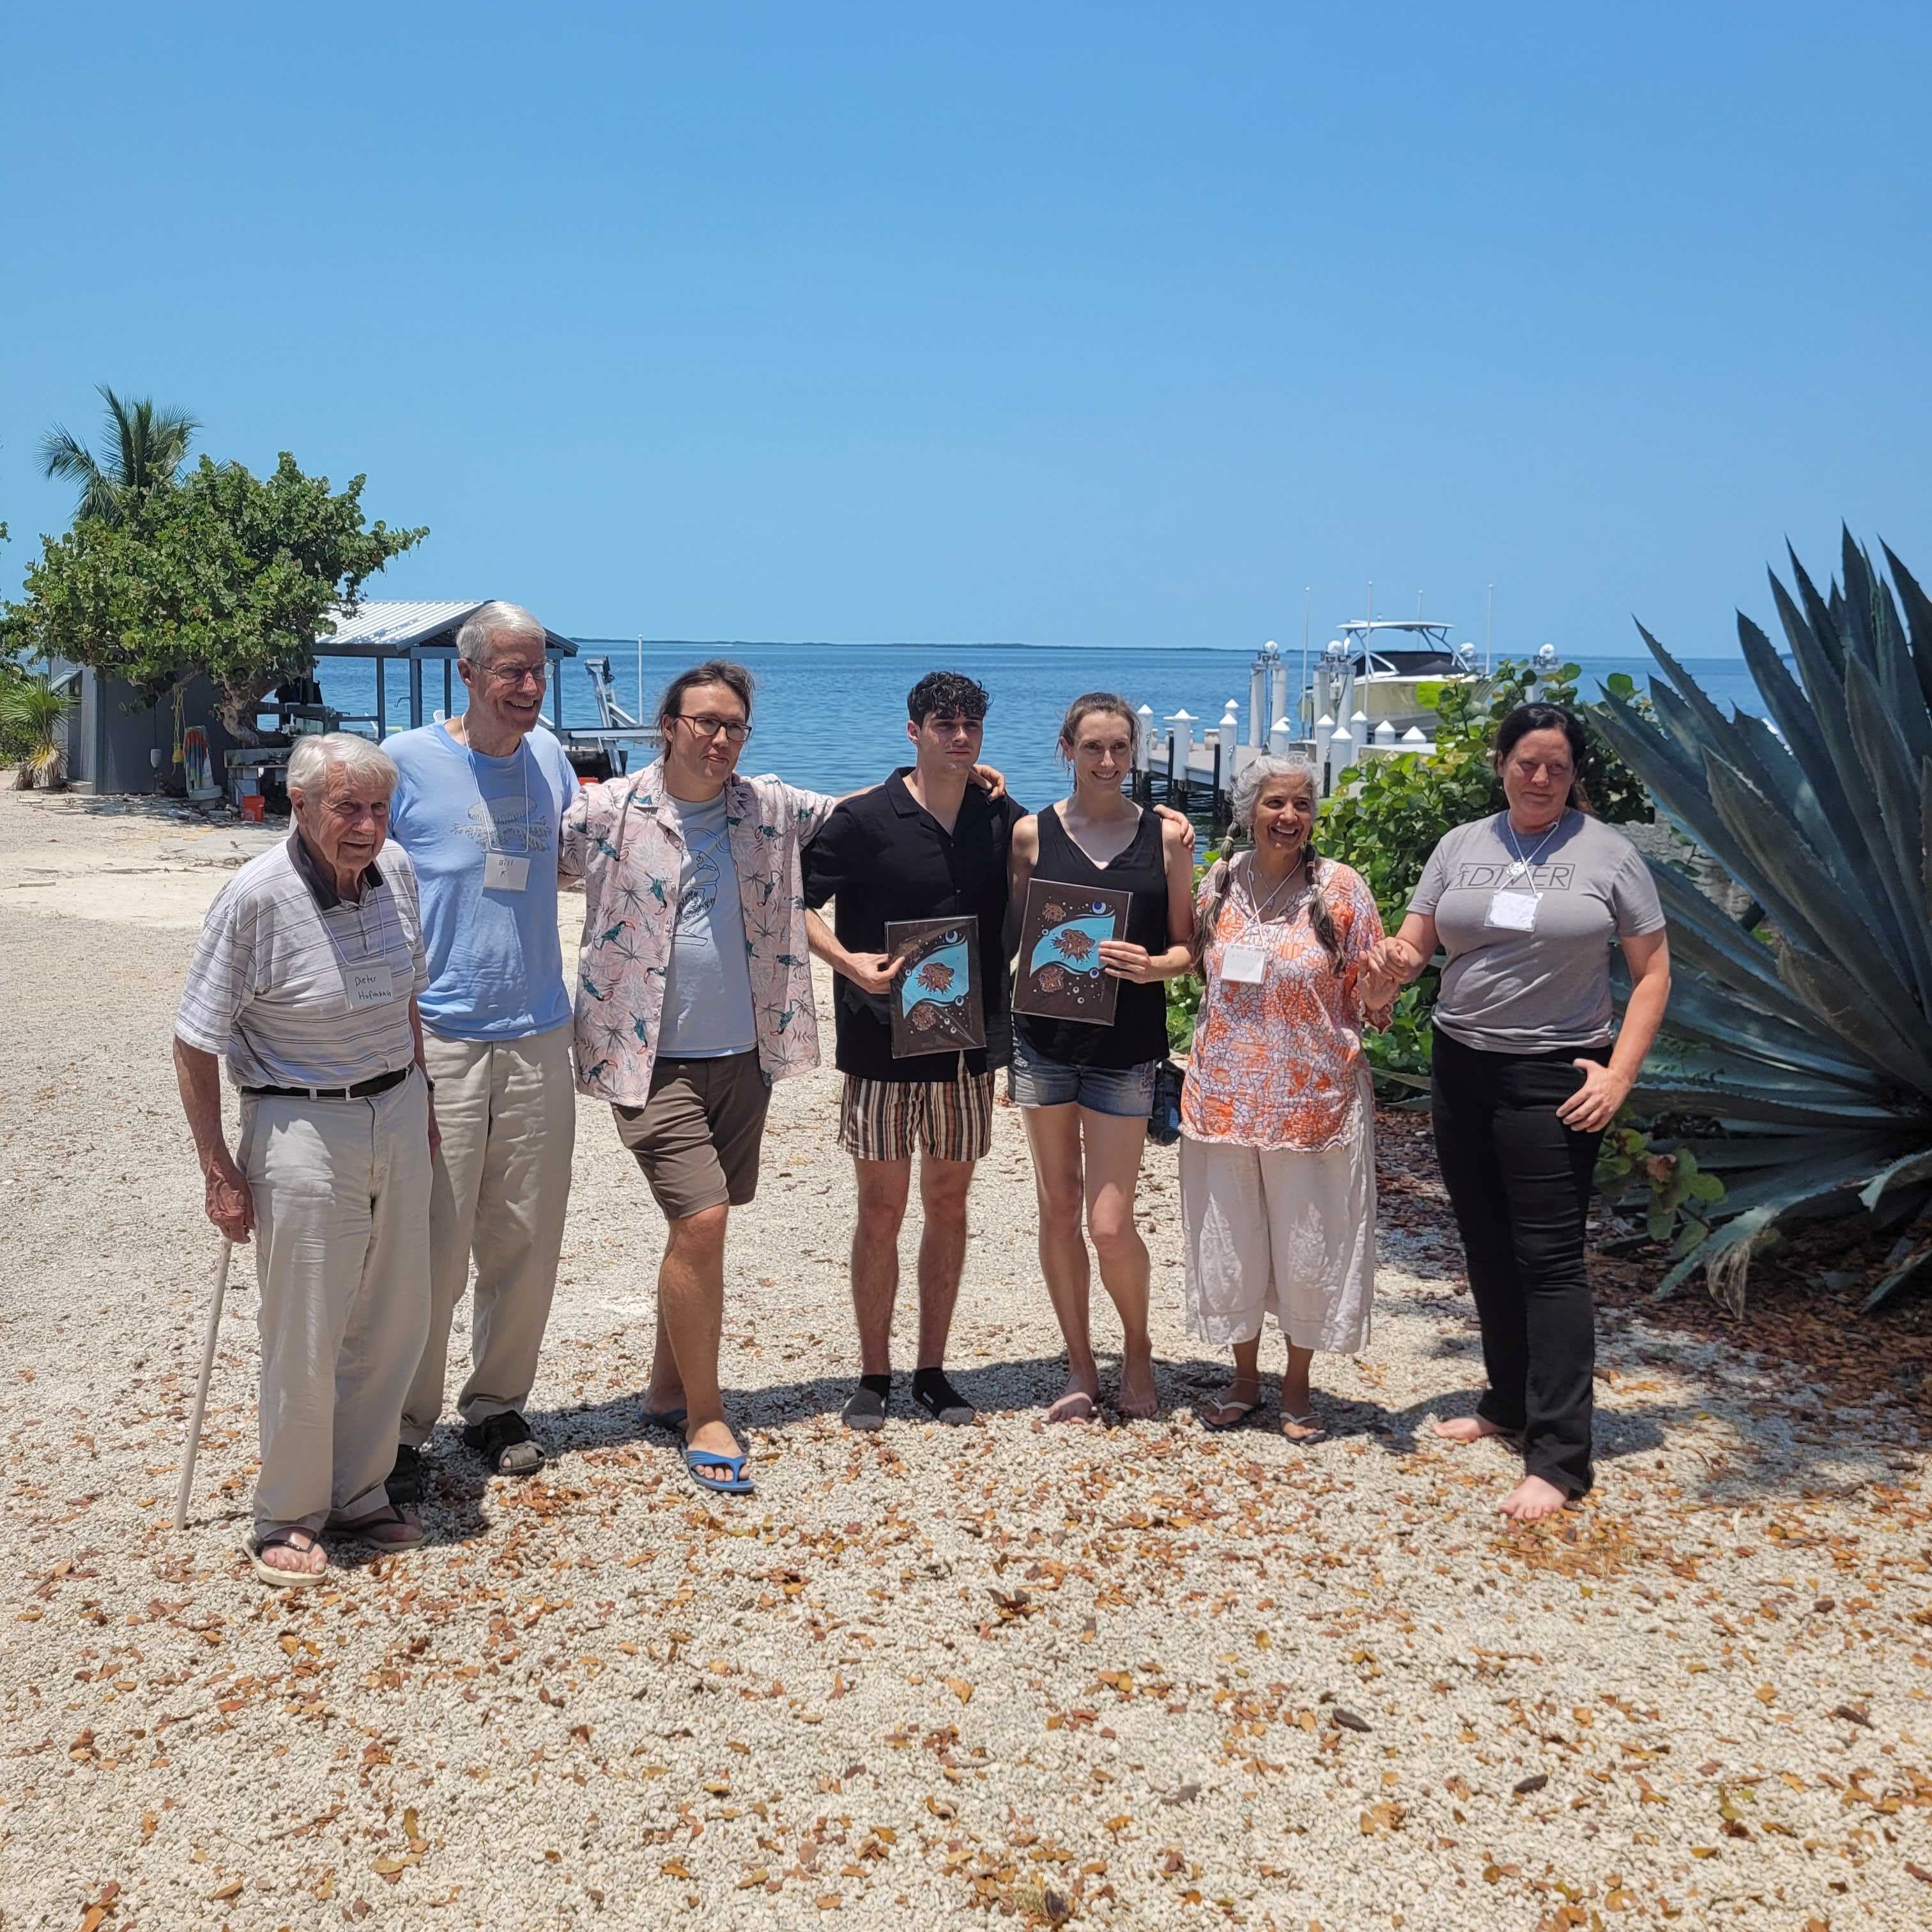 Group of people on beach with water in background, two holding awards